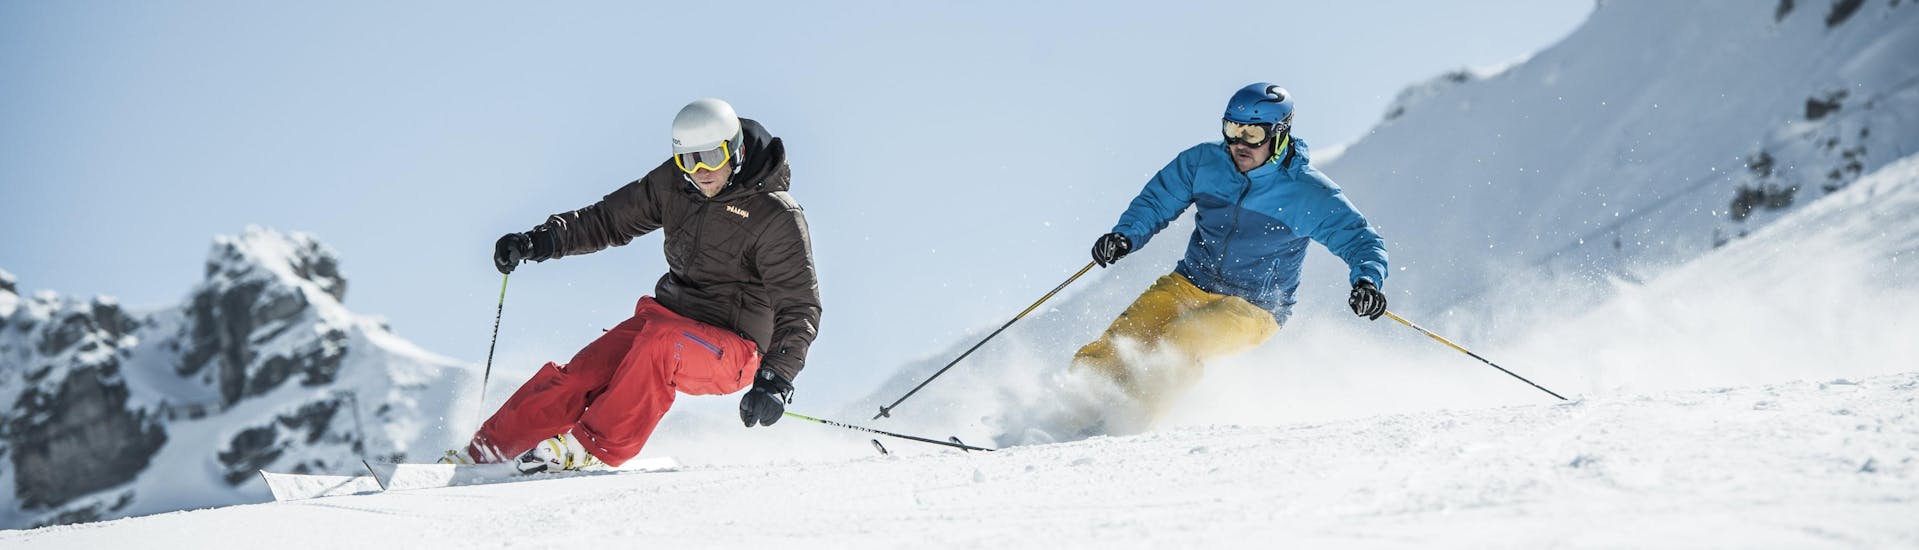 A skier practices the correct skiing technique during one of the private lessons in Grindelwald.